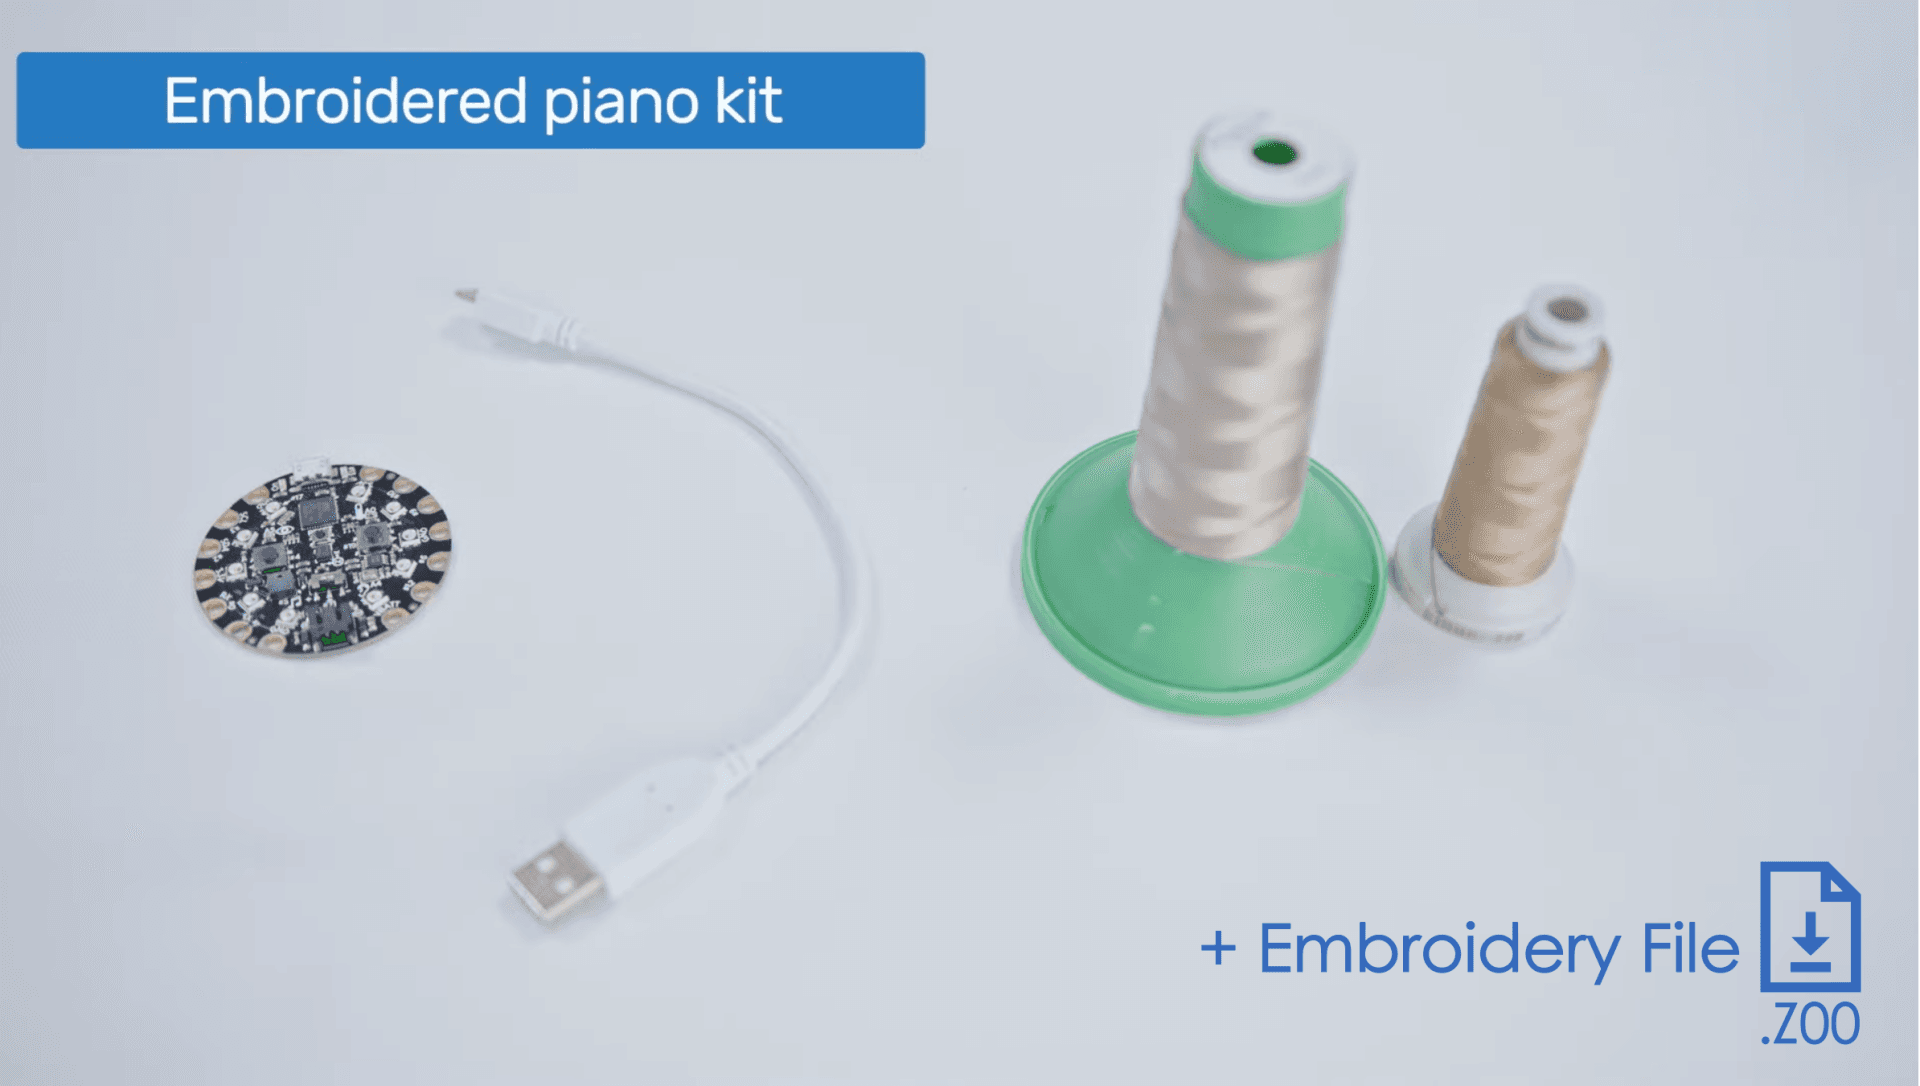 Product: DIY KIT Embroidered Piano